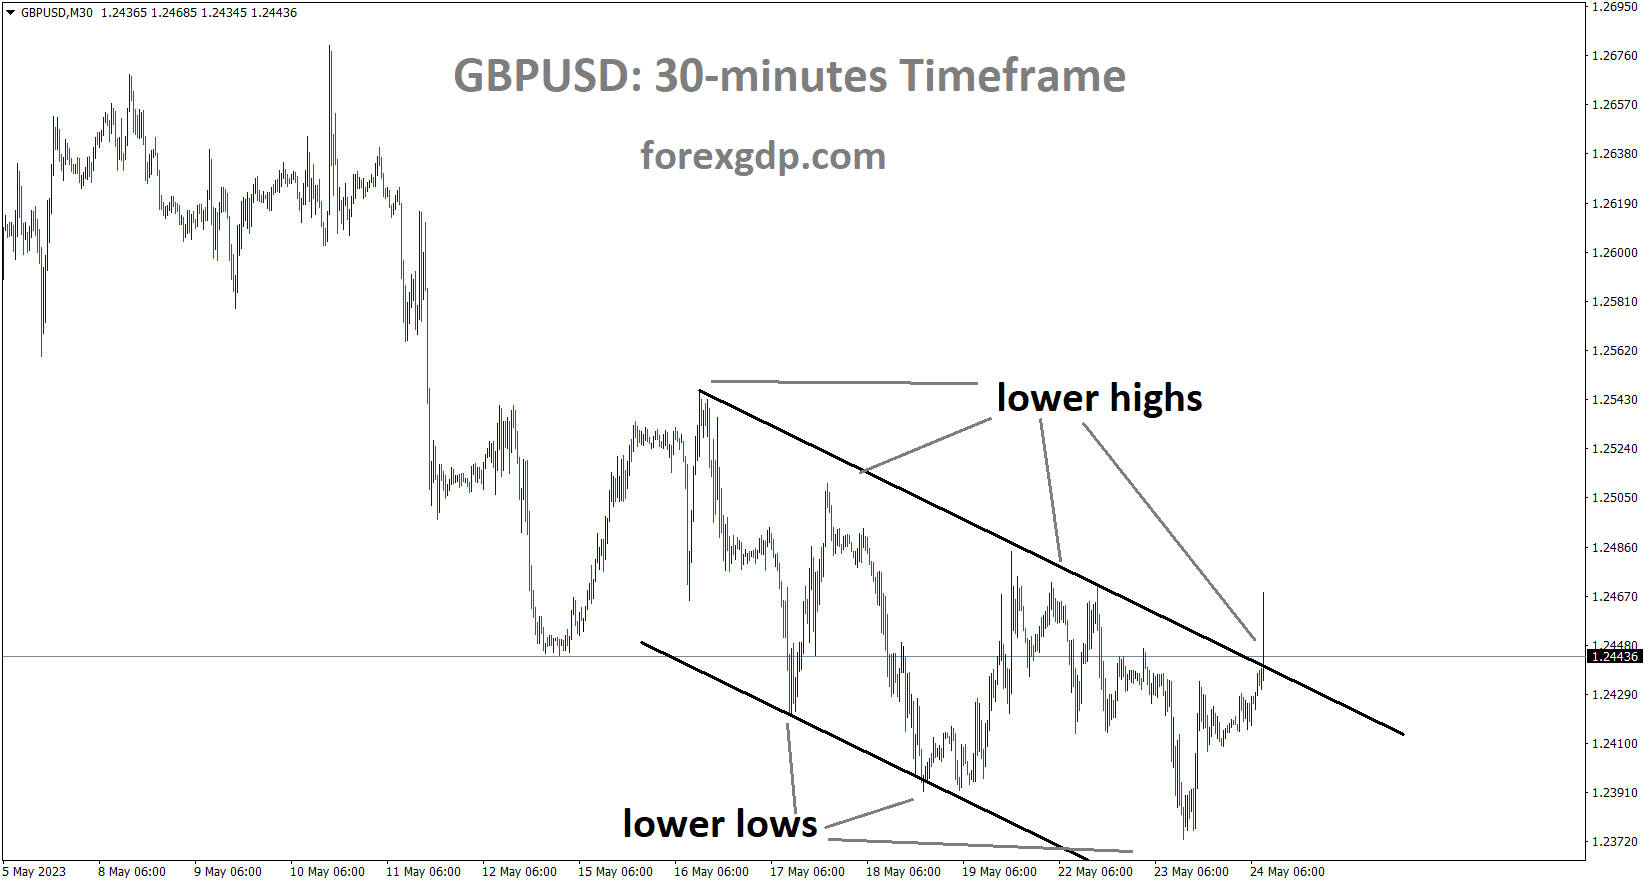 GBPUSD M30 TF analysis Market is moving in the Descending channel and the market has reached the lower high area of the channel